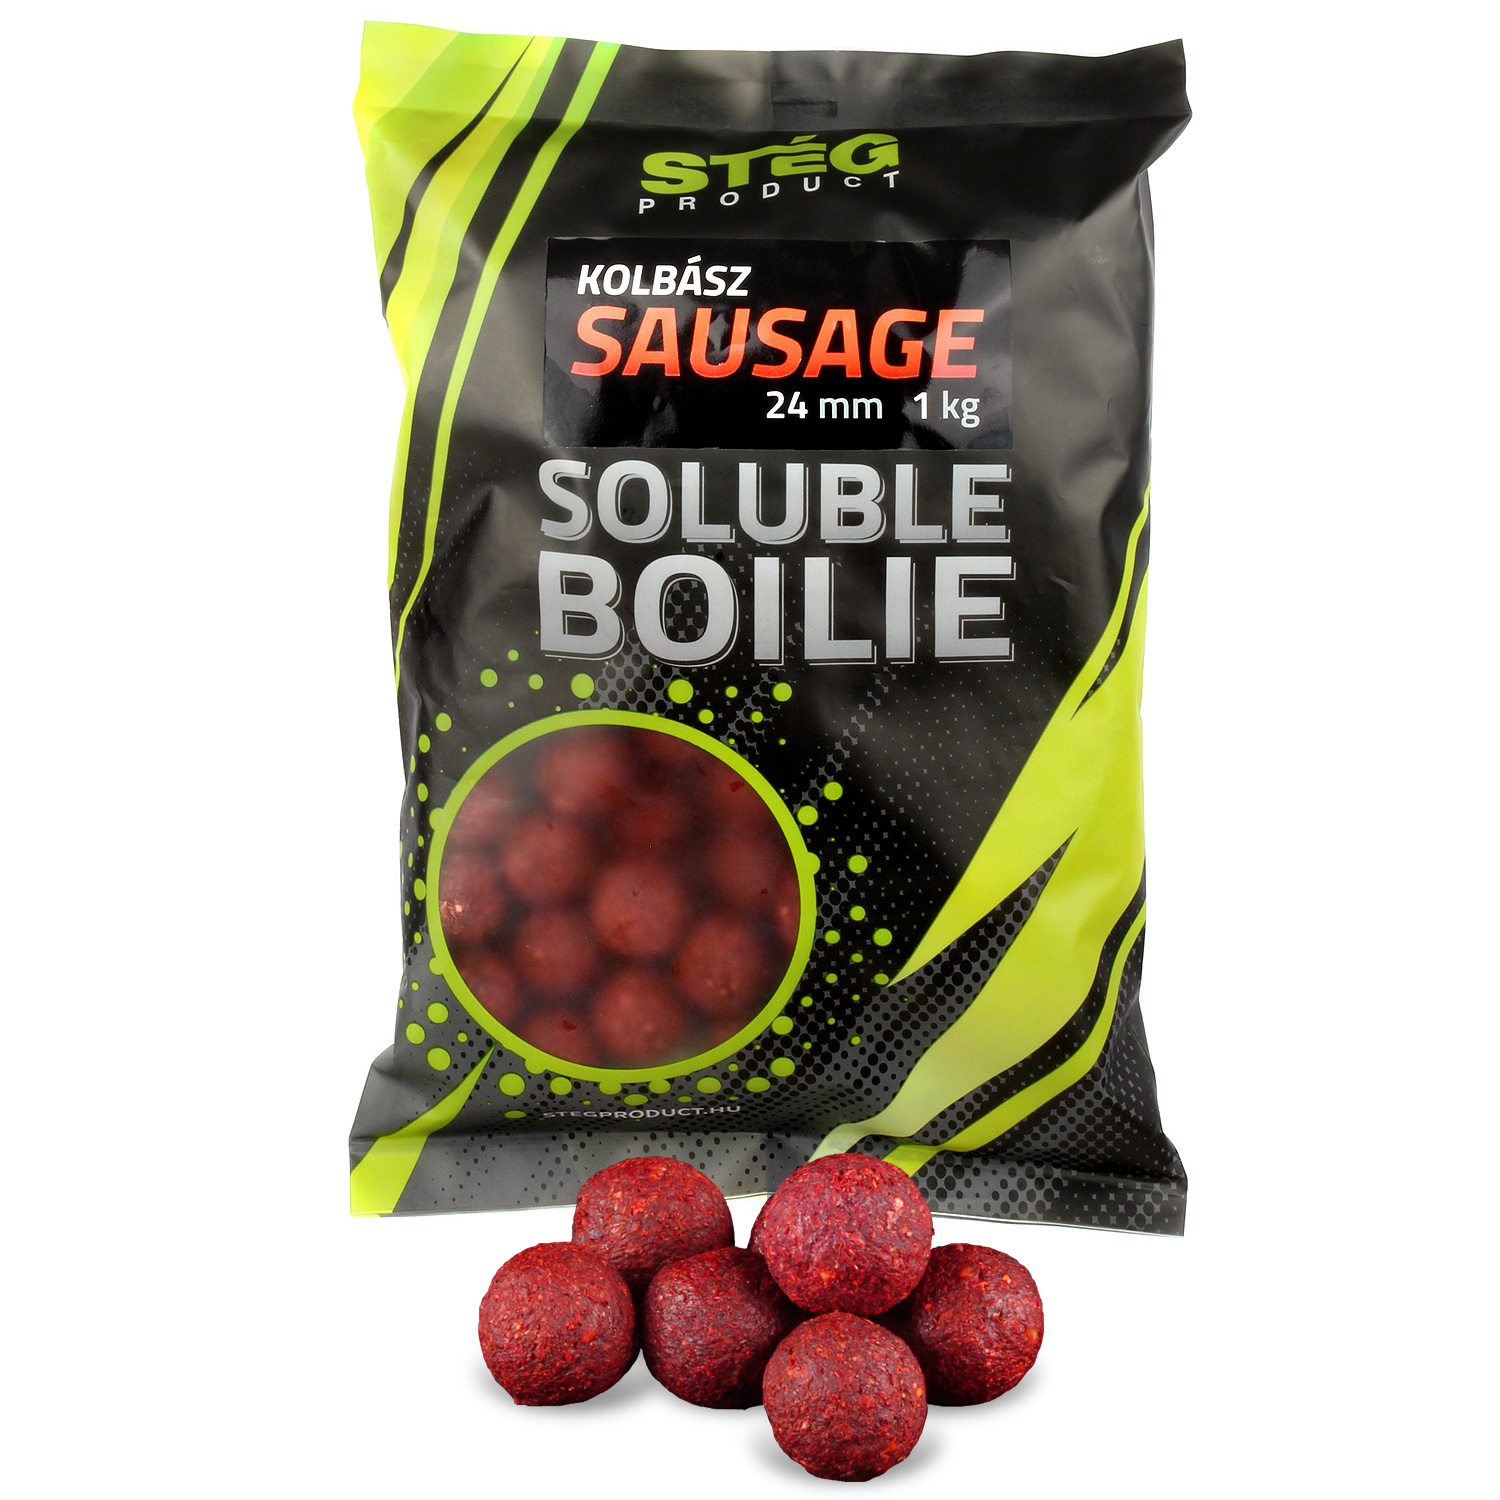 Stg Product Soluble Boilie 24mm Sausage 1kg